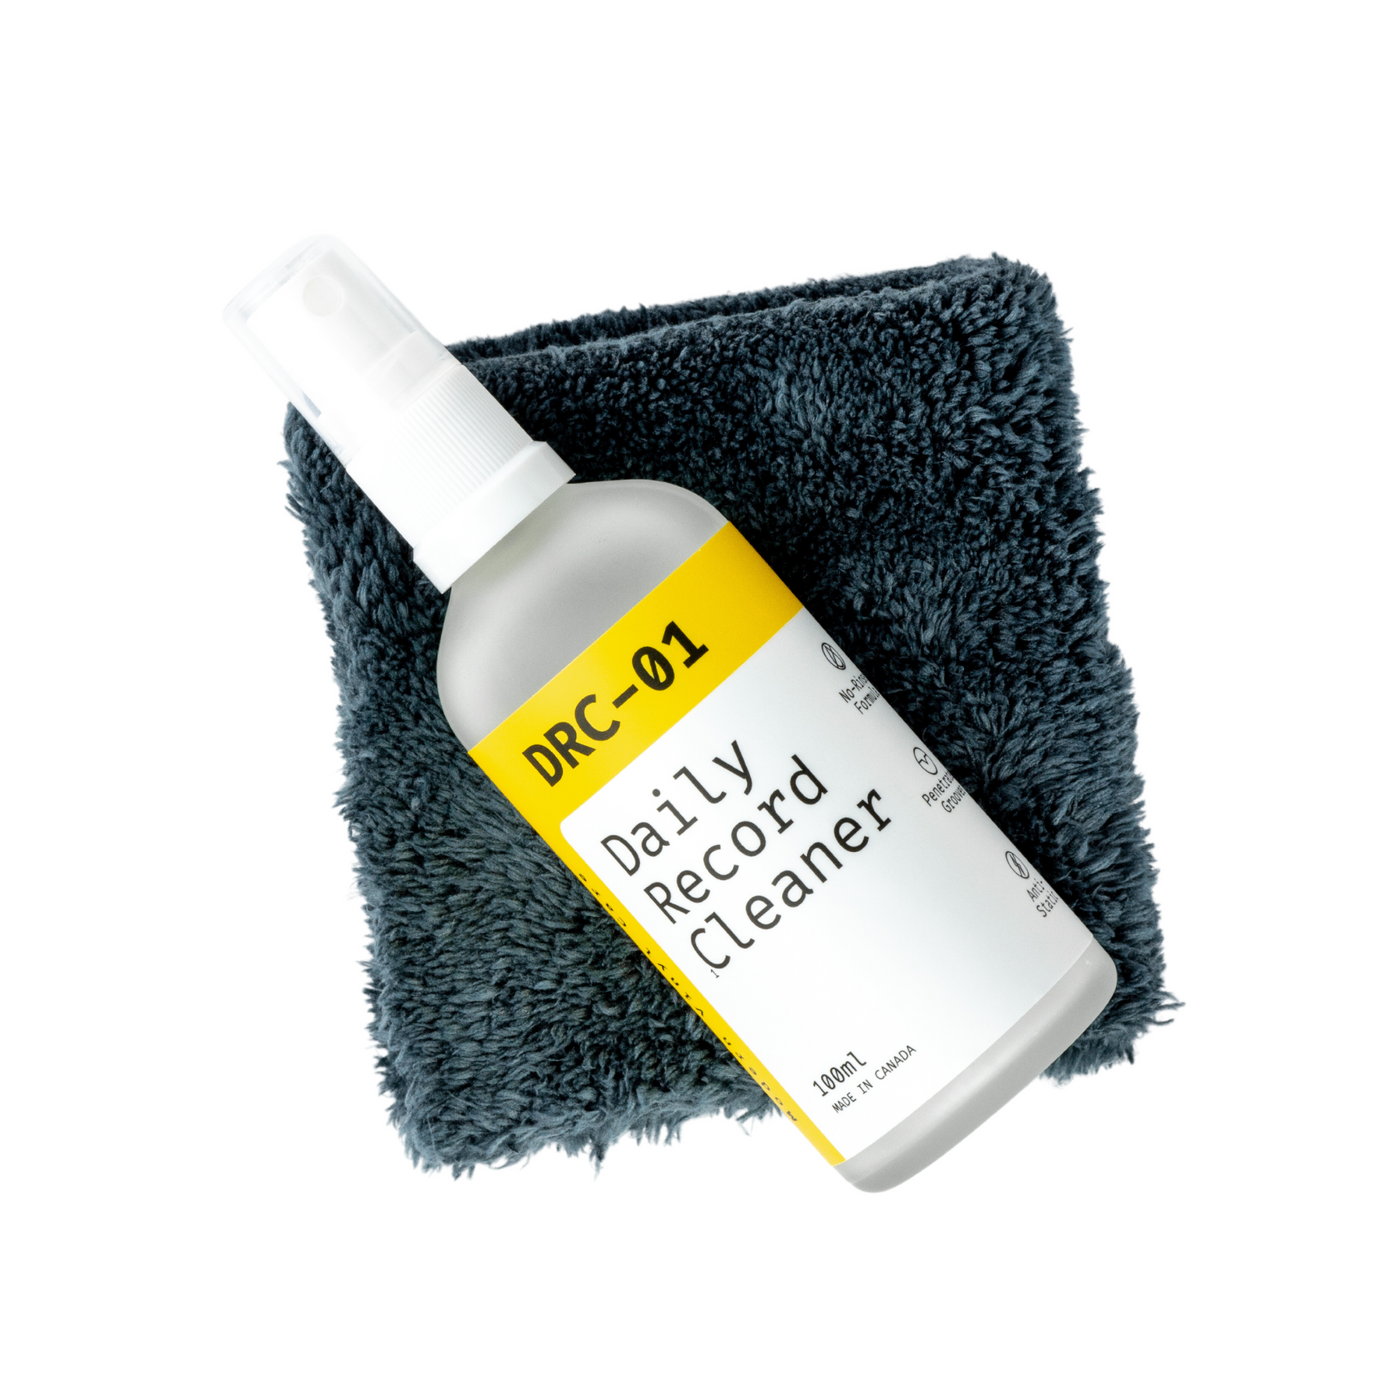 Daily Record Cleaning Kit by LAB/33